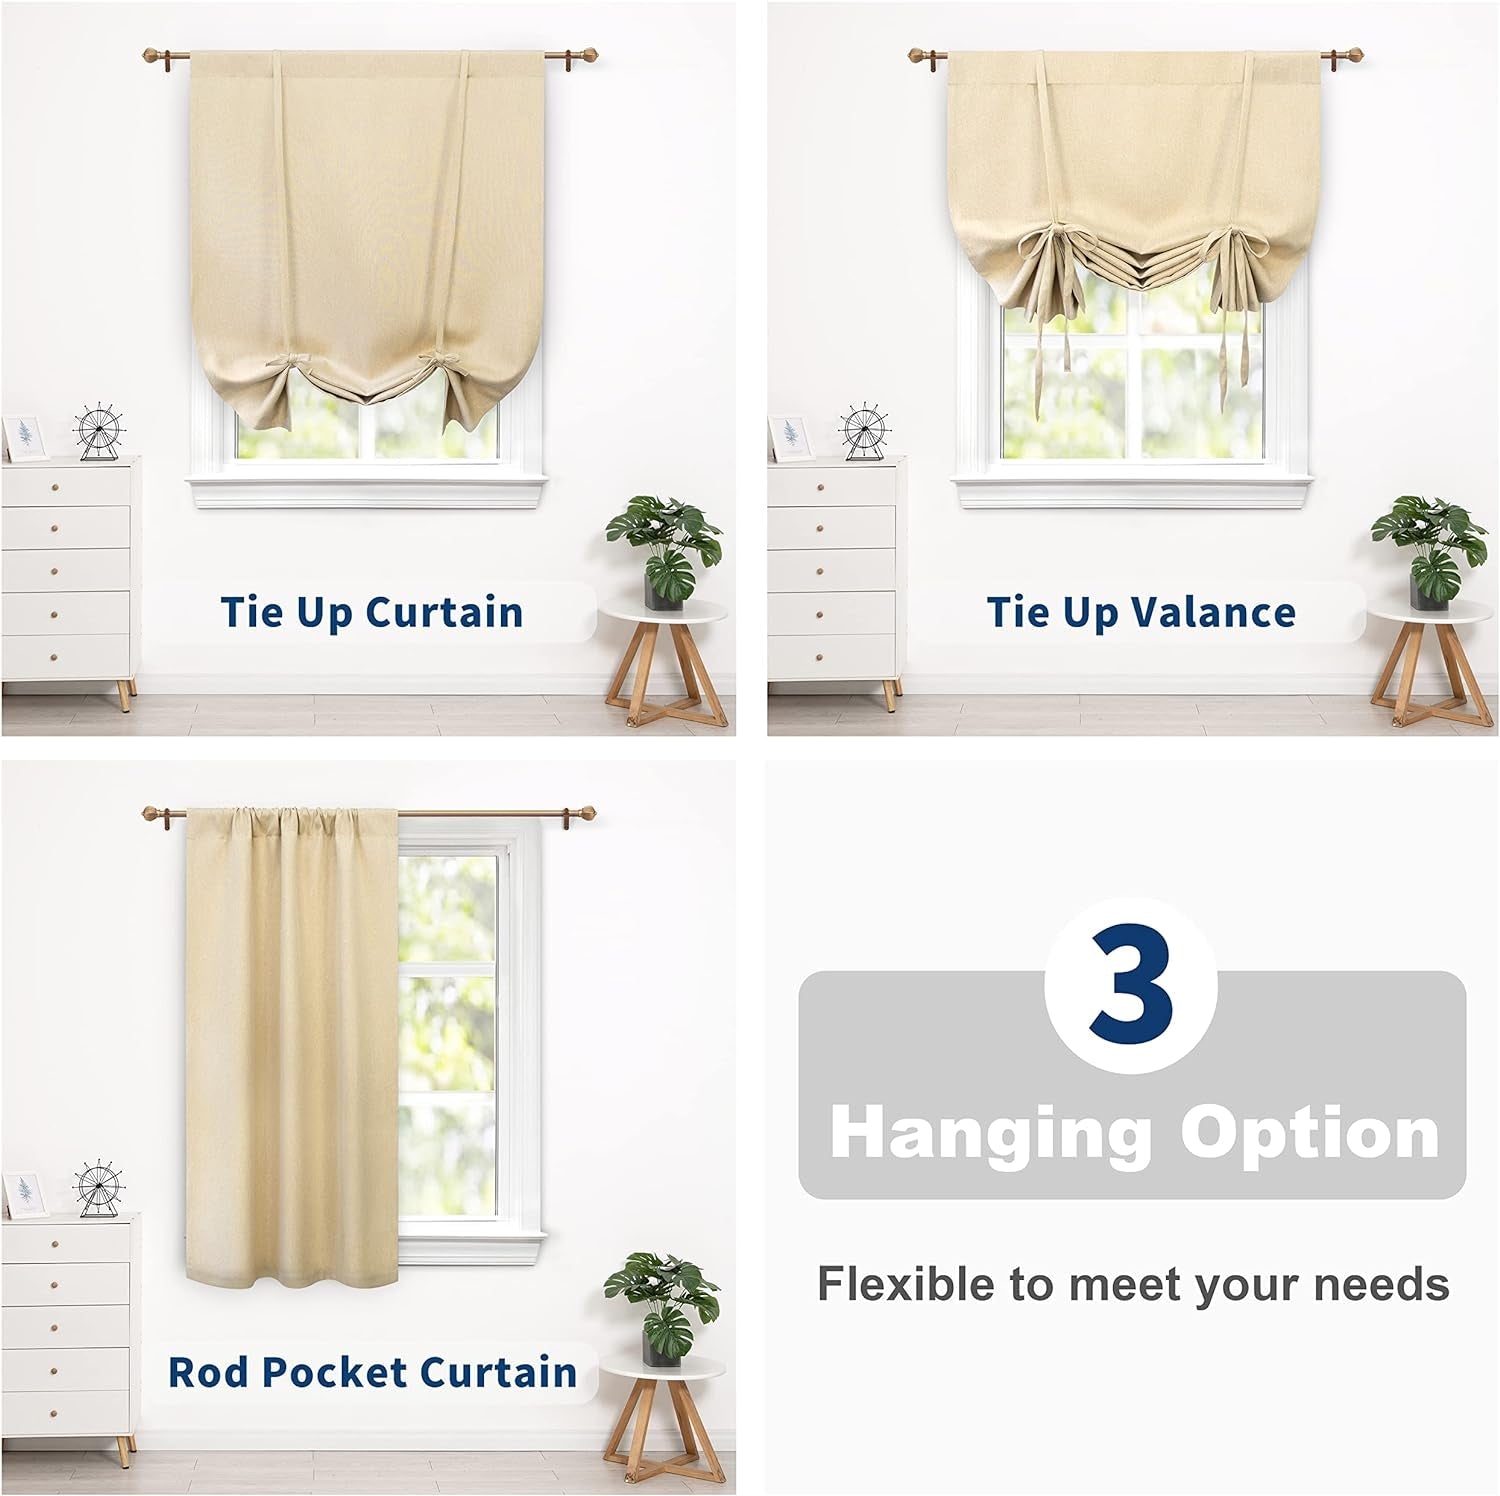 Driftaway Faux Linen Textured Solid Color Blackout Tie up Curtain for Kitchen Decorative Adjustable Balloon Rod Pocket Window Linen Curtains for Small Window 39 Inch by 55 Inch Beige